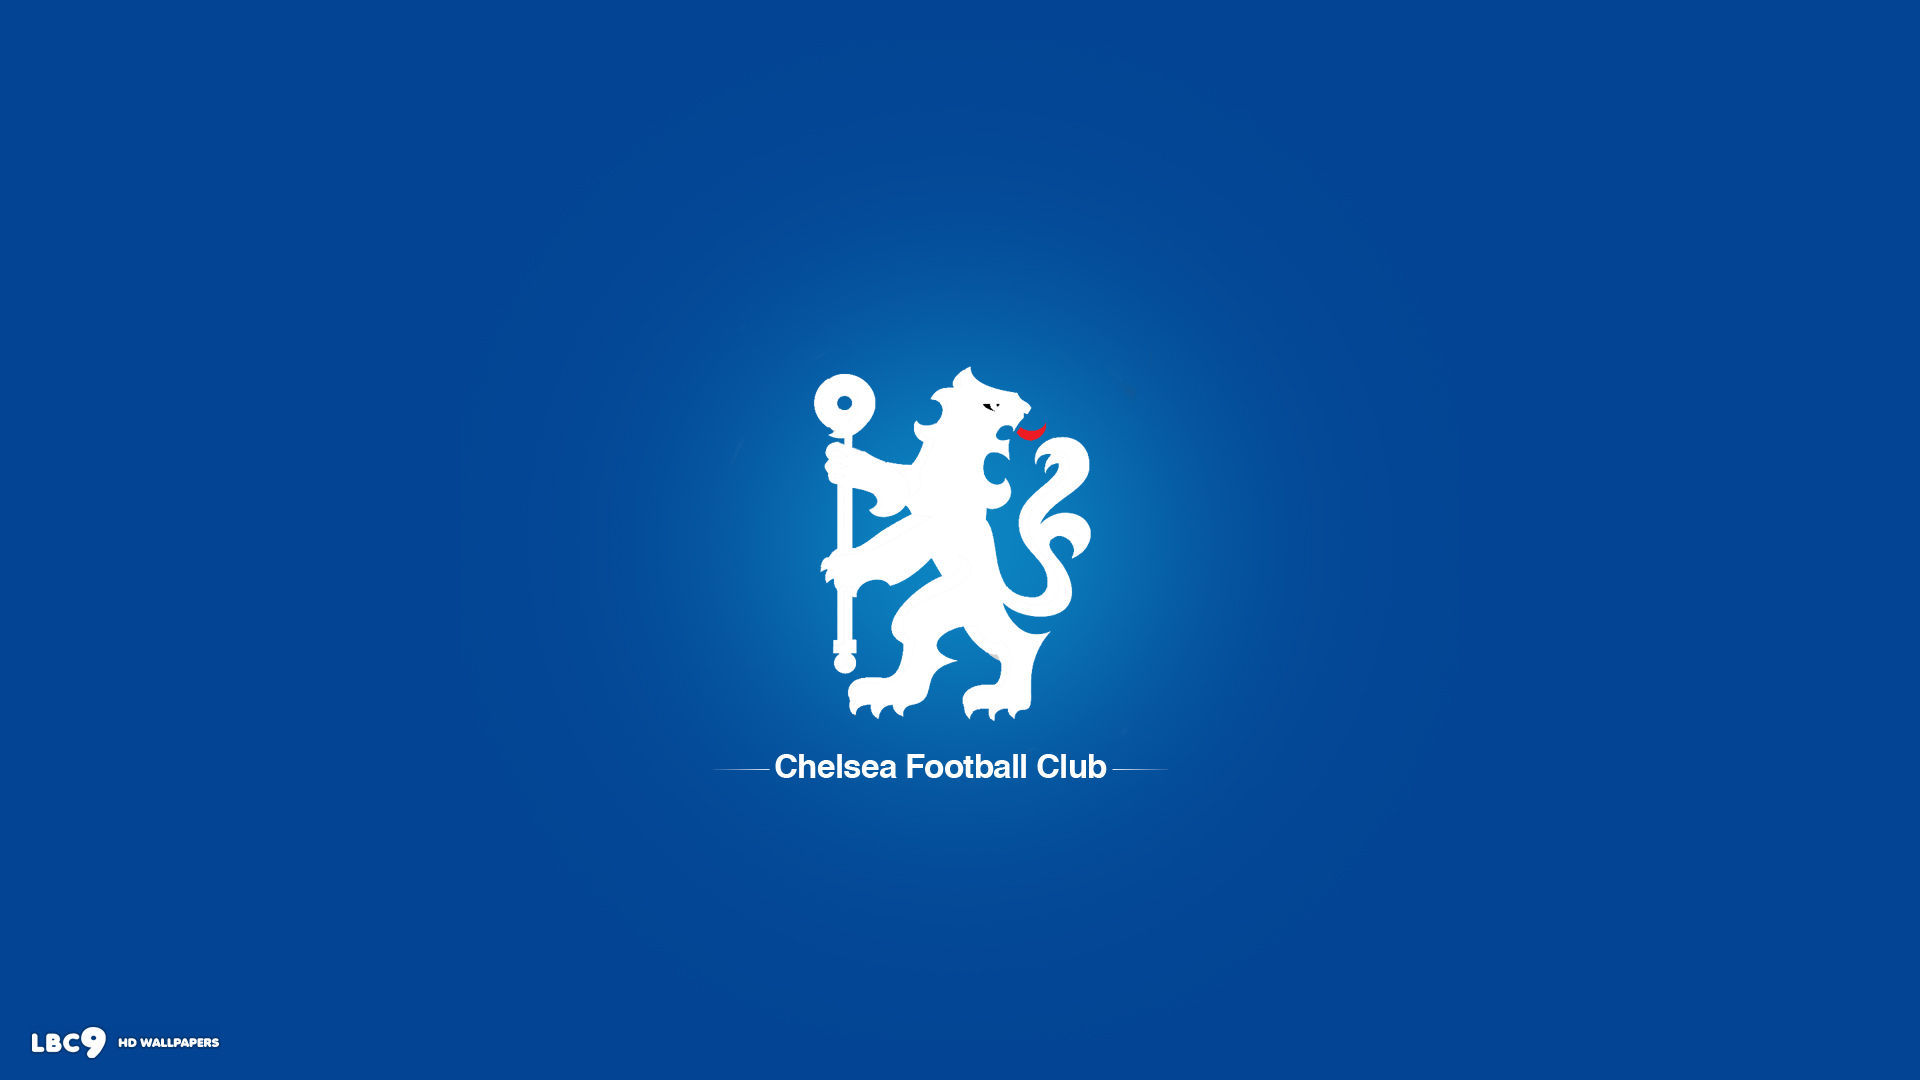 Popular Football Club Chelsea Wallpaper And Image